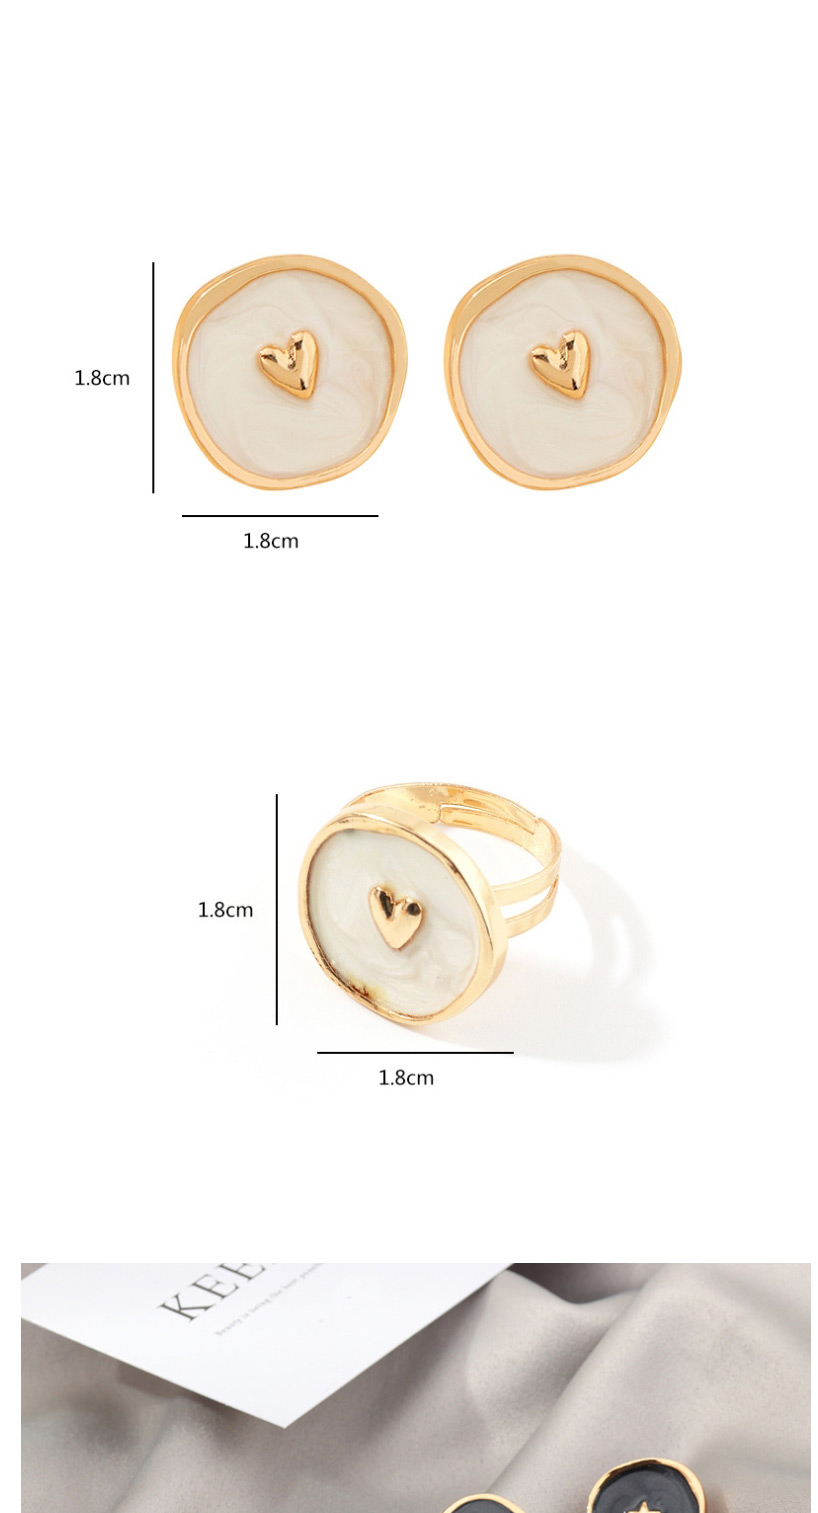 Fashion gold color+black star shape decorated ring,Fashion Rings